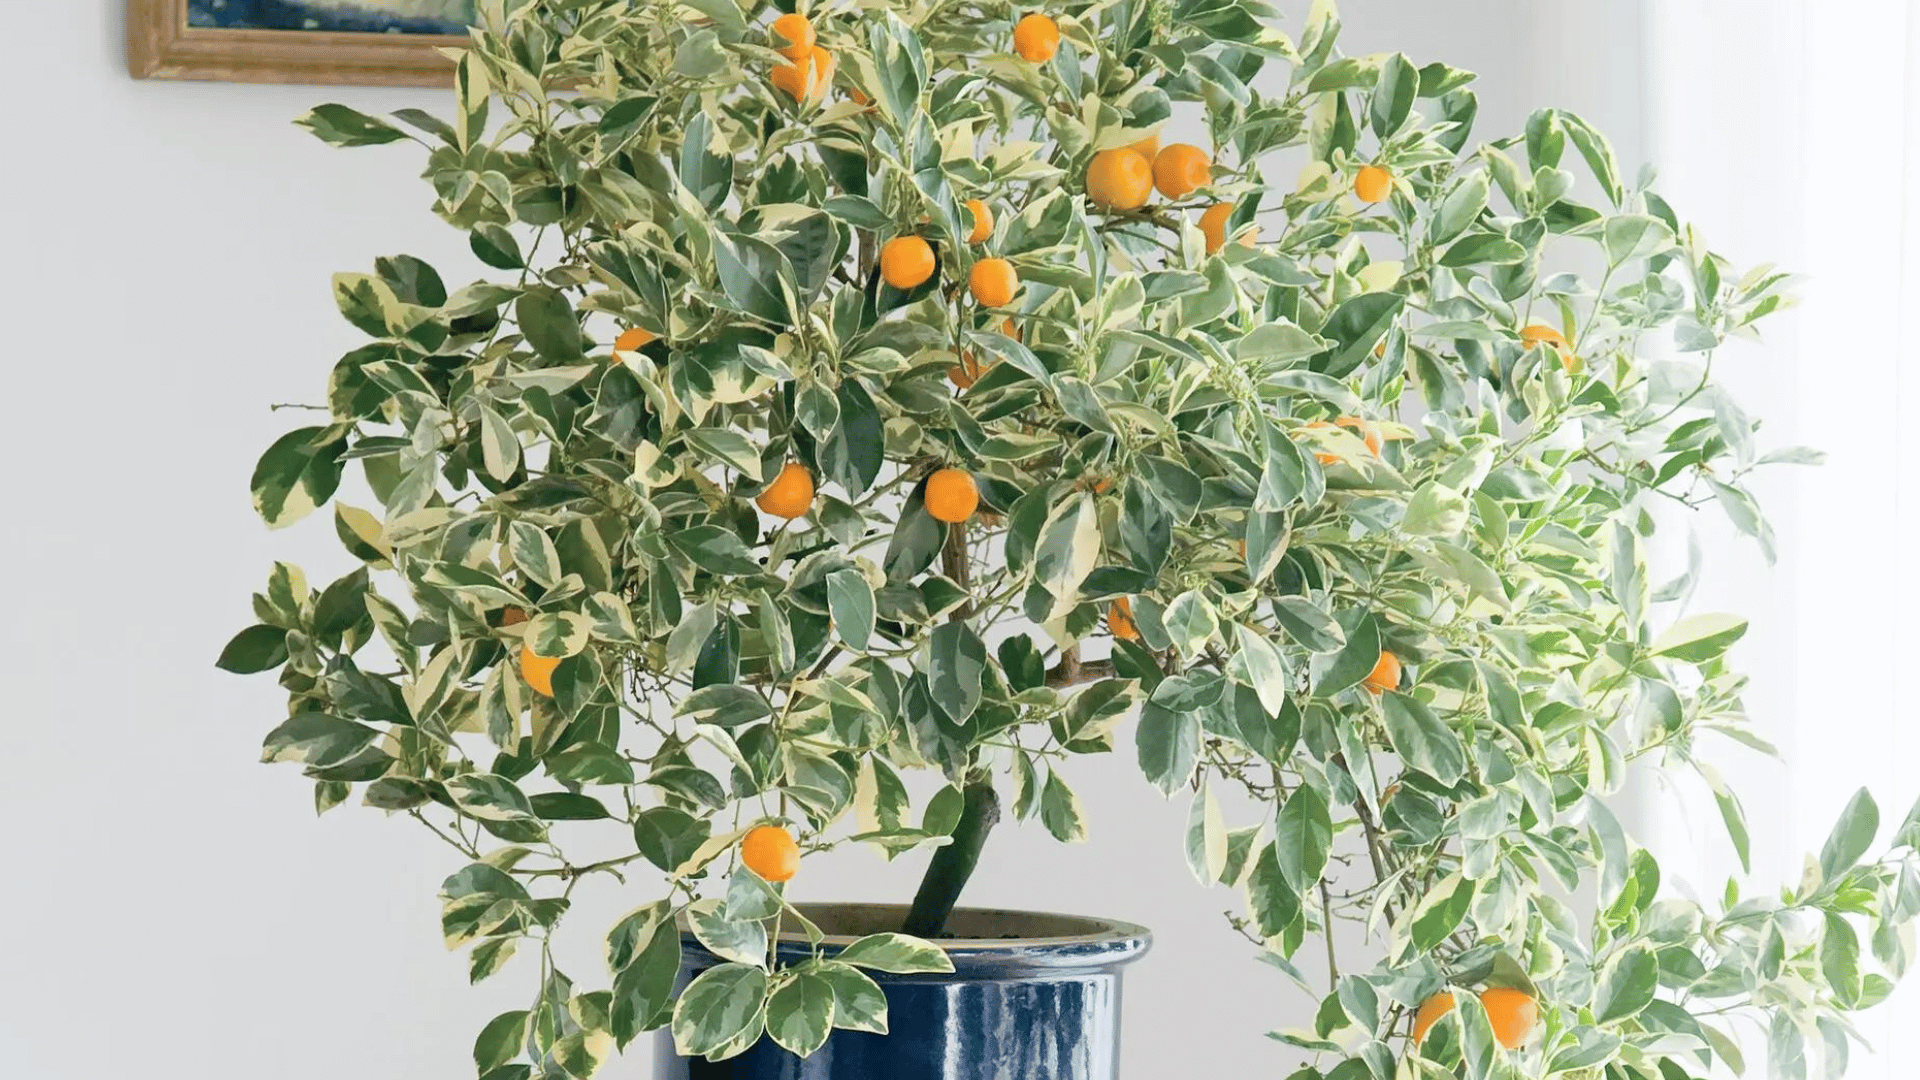 The variegated Calamondin orange tree bears tiny sour fruits that can be substituted for lemons or limes in drinks, baking and marmalade .Adam Mastoon